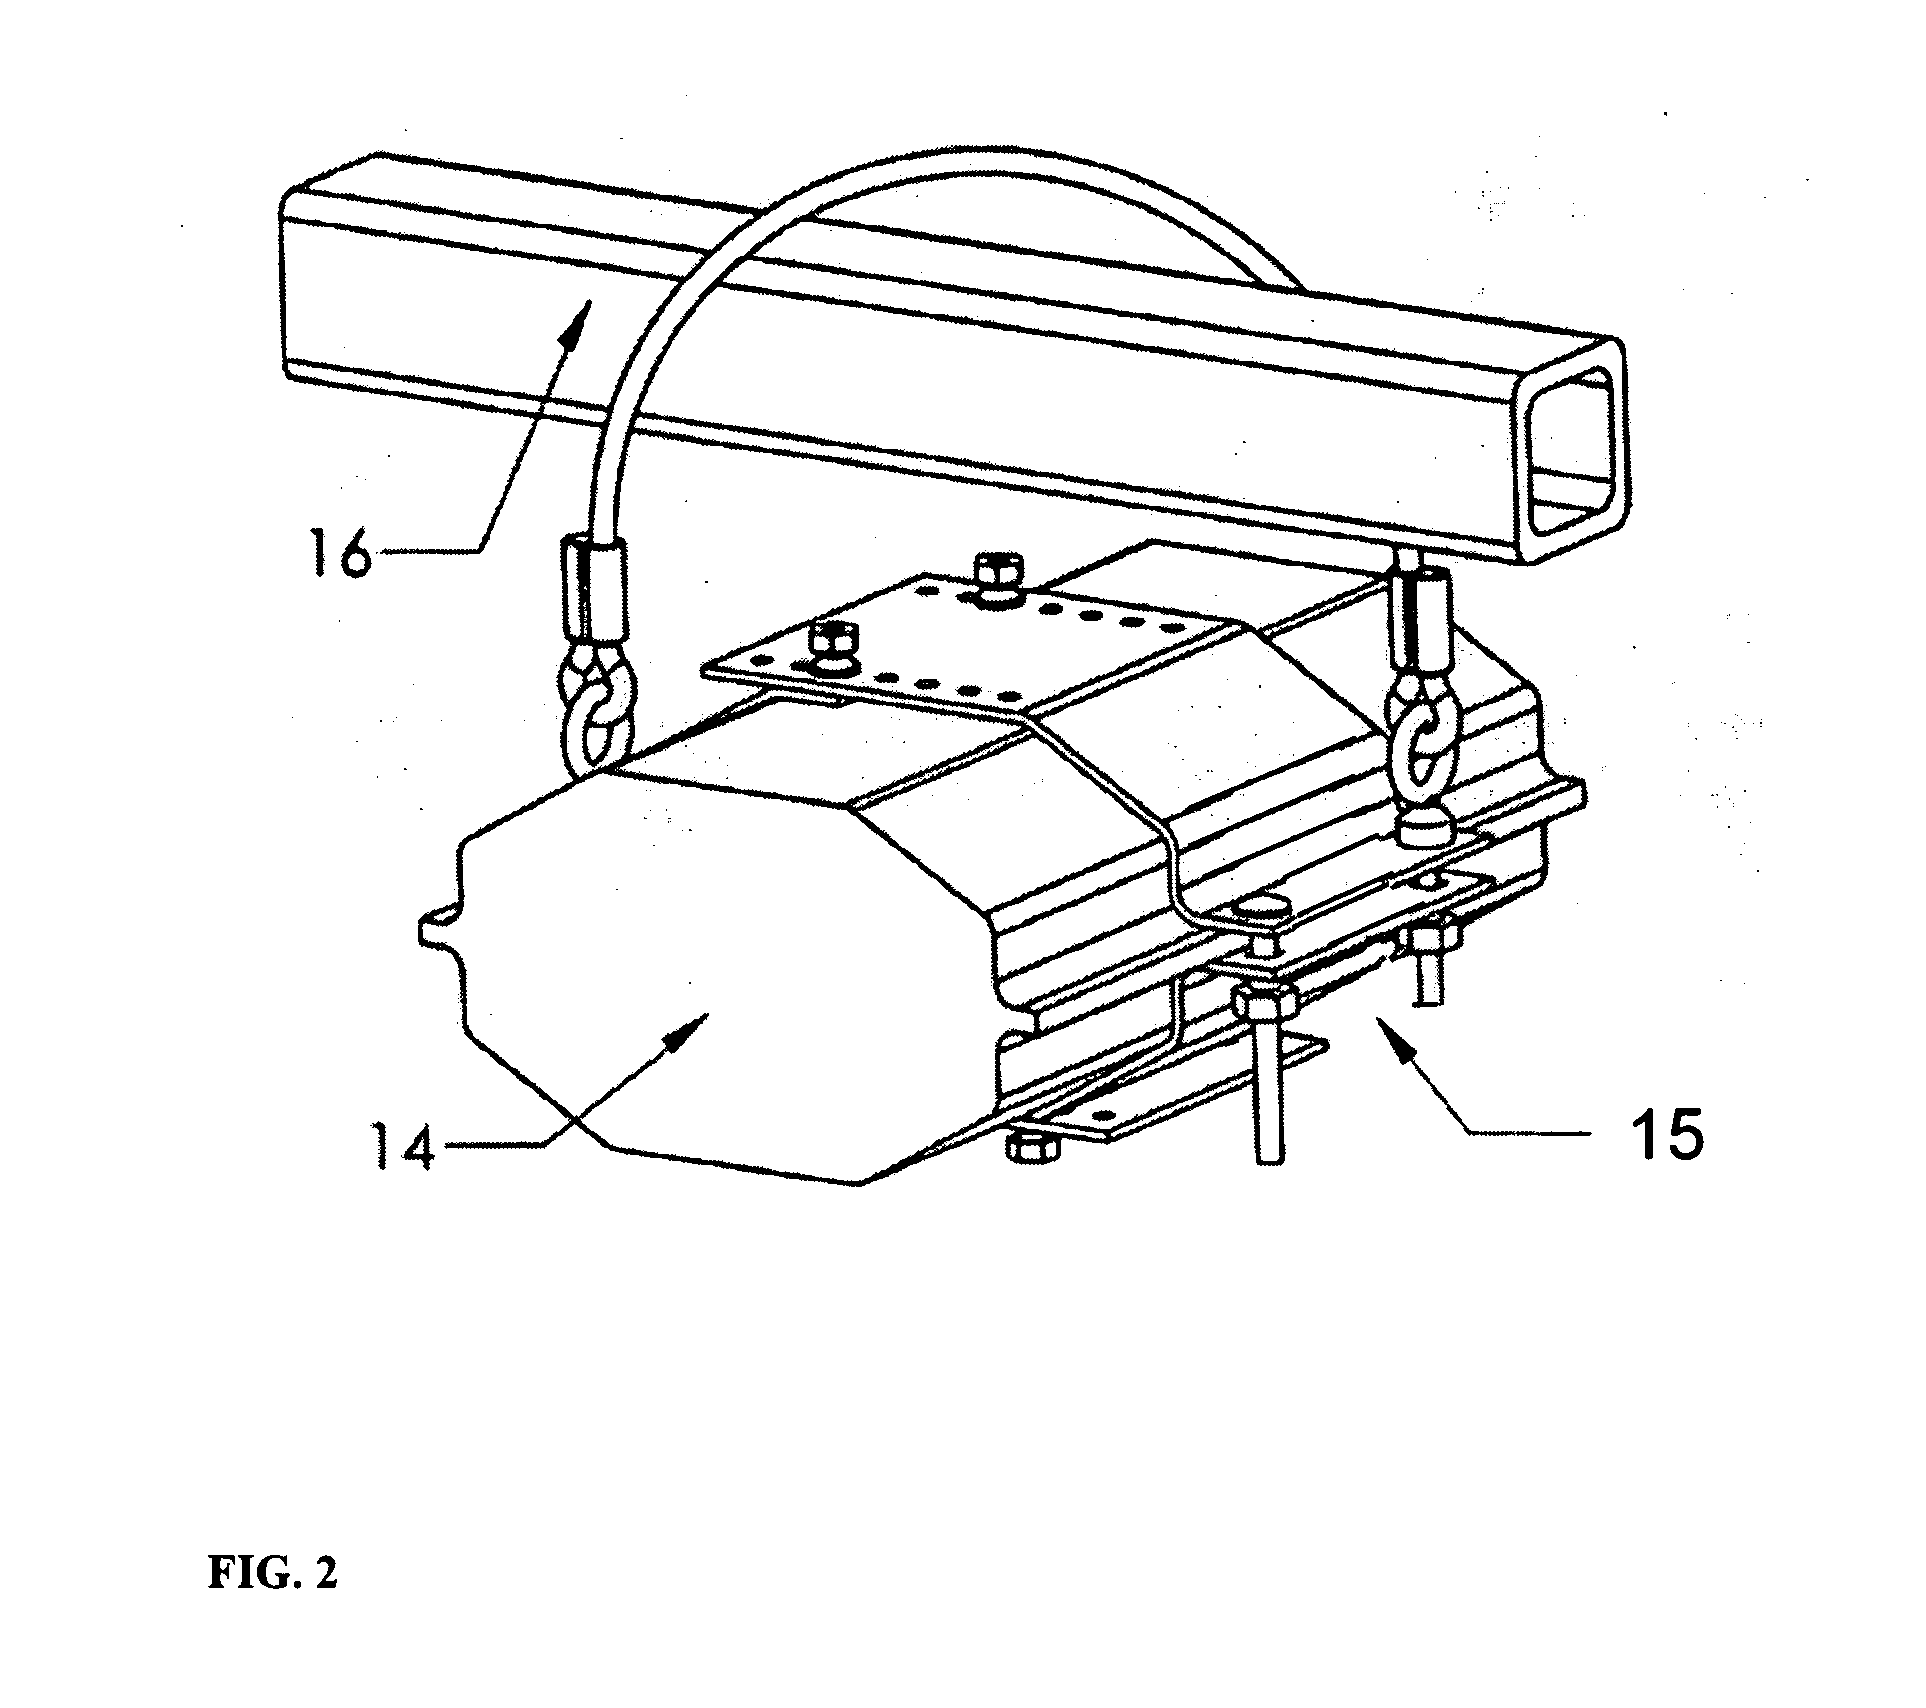 System and Method of Catalytic Converter Theft Deterrence